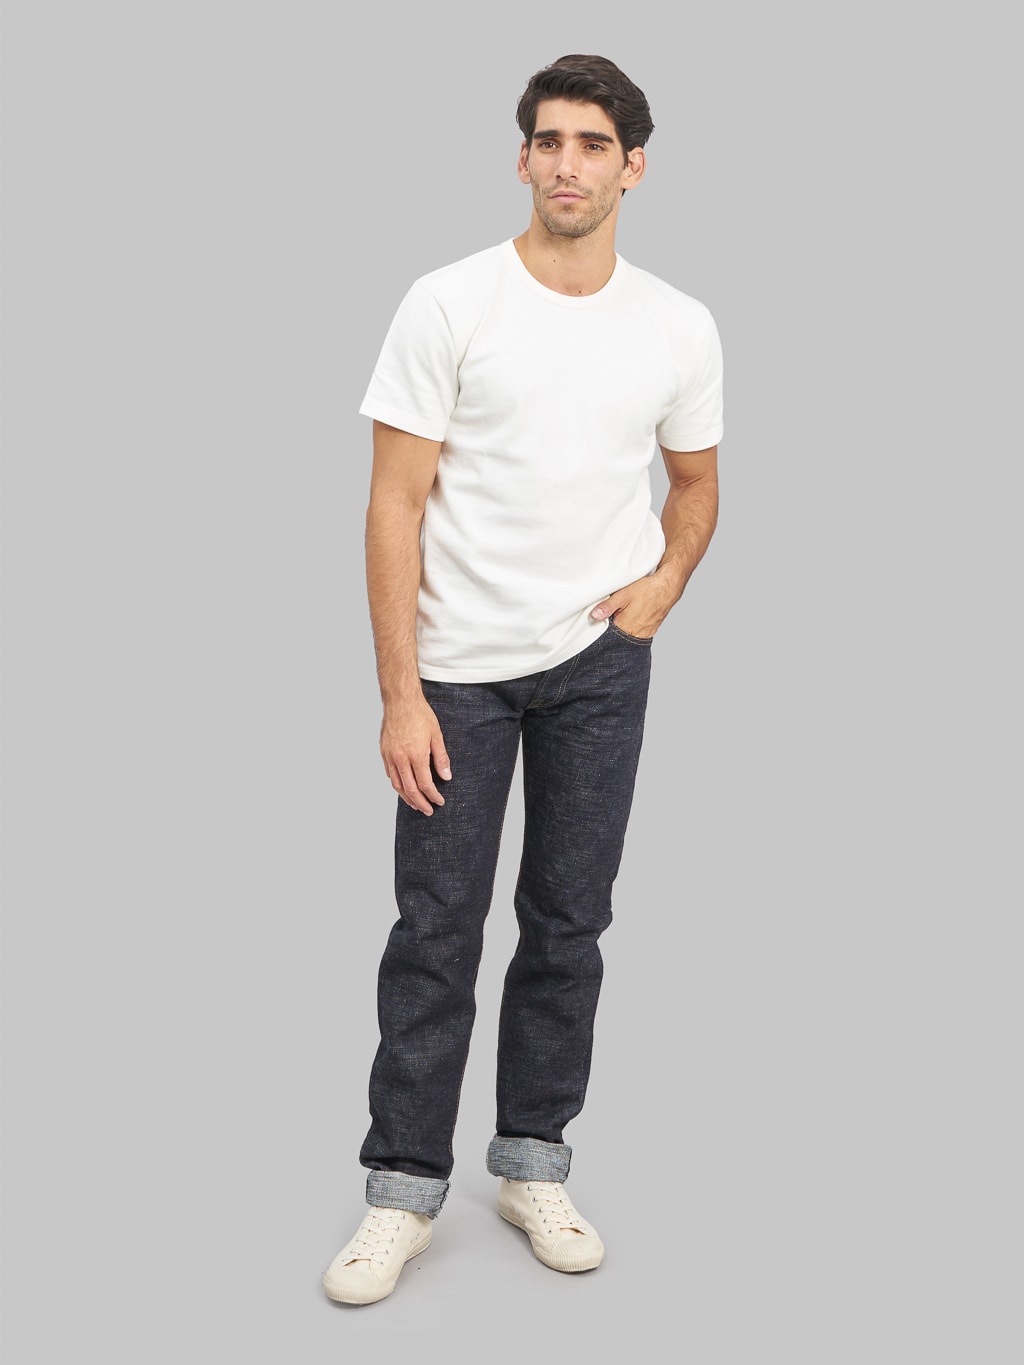 the strike gold 7104 ultra slubby straight tapered jeans style